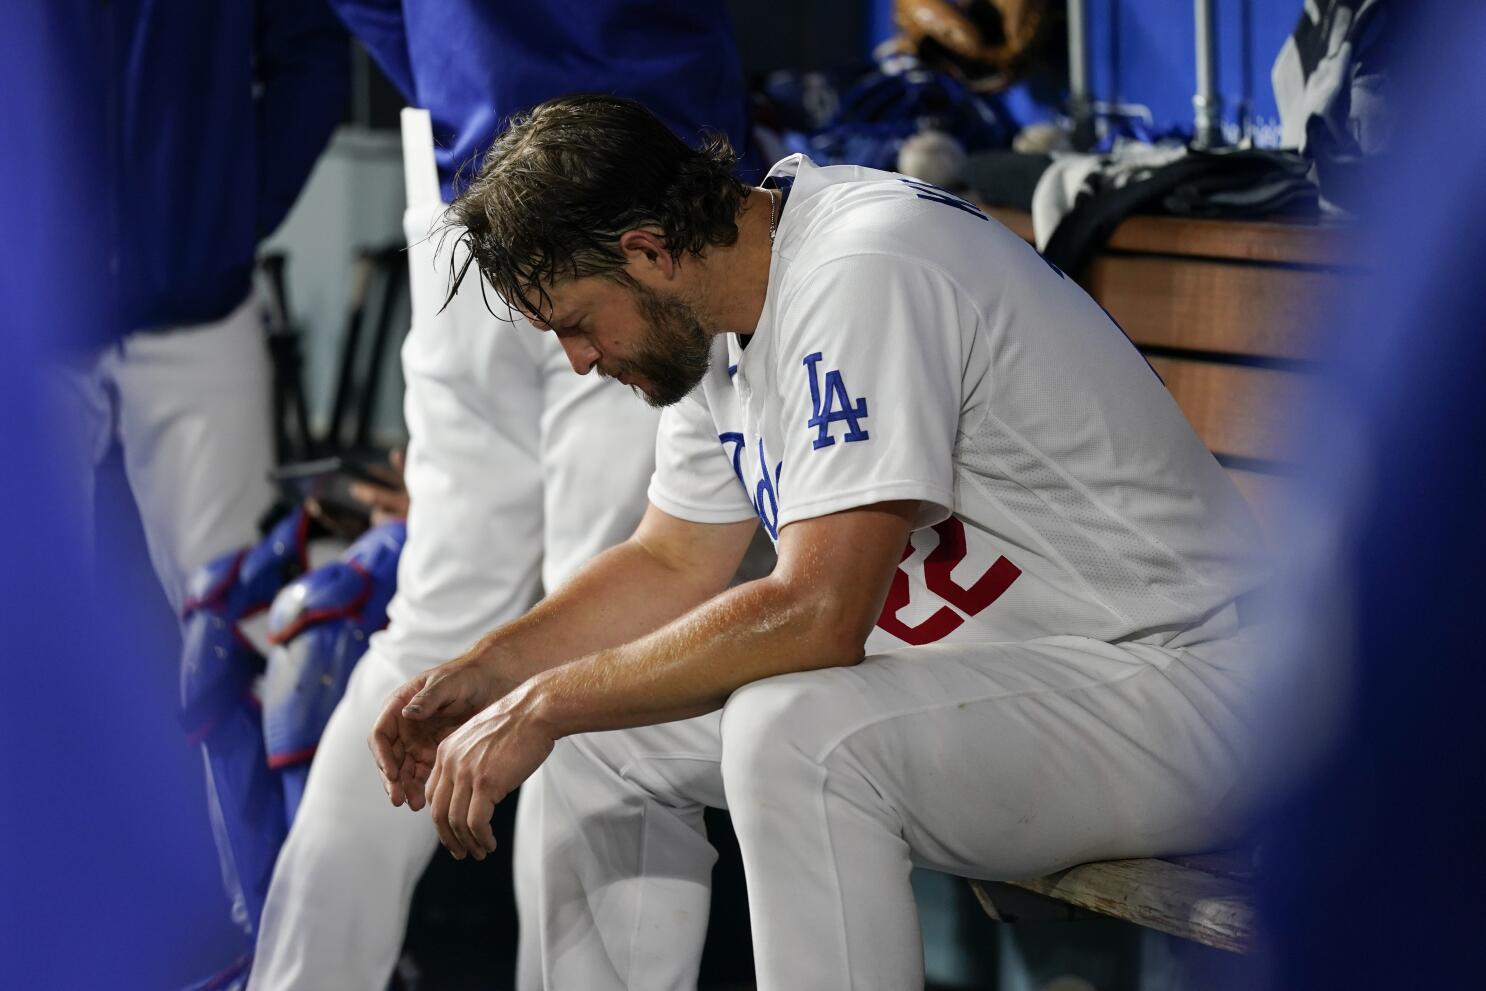 Clayton Kershaw's dream becomes a nightmare in Dodgers' loss - Los